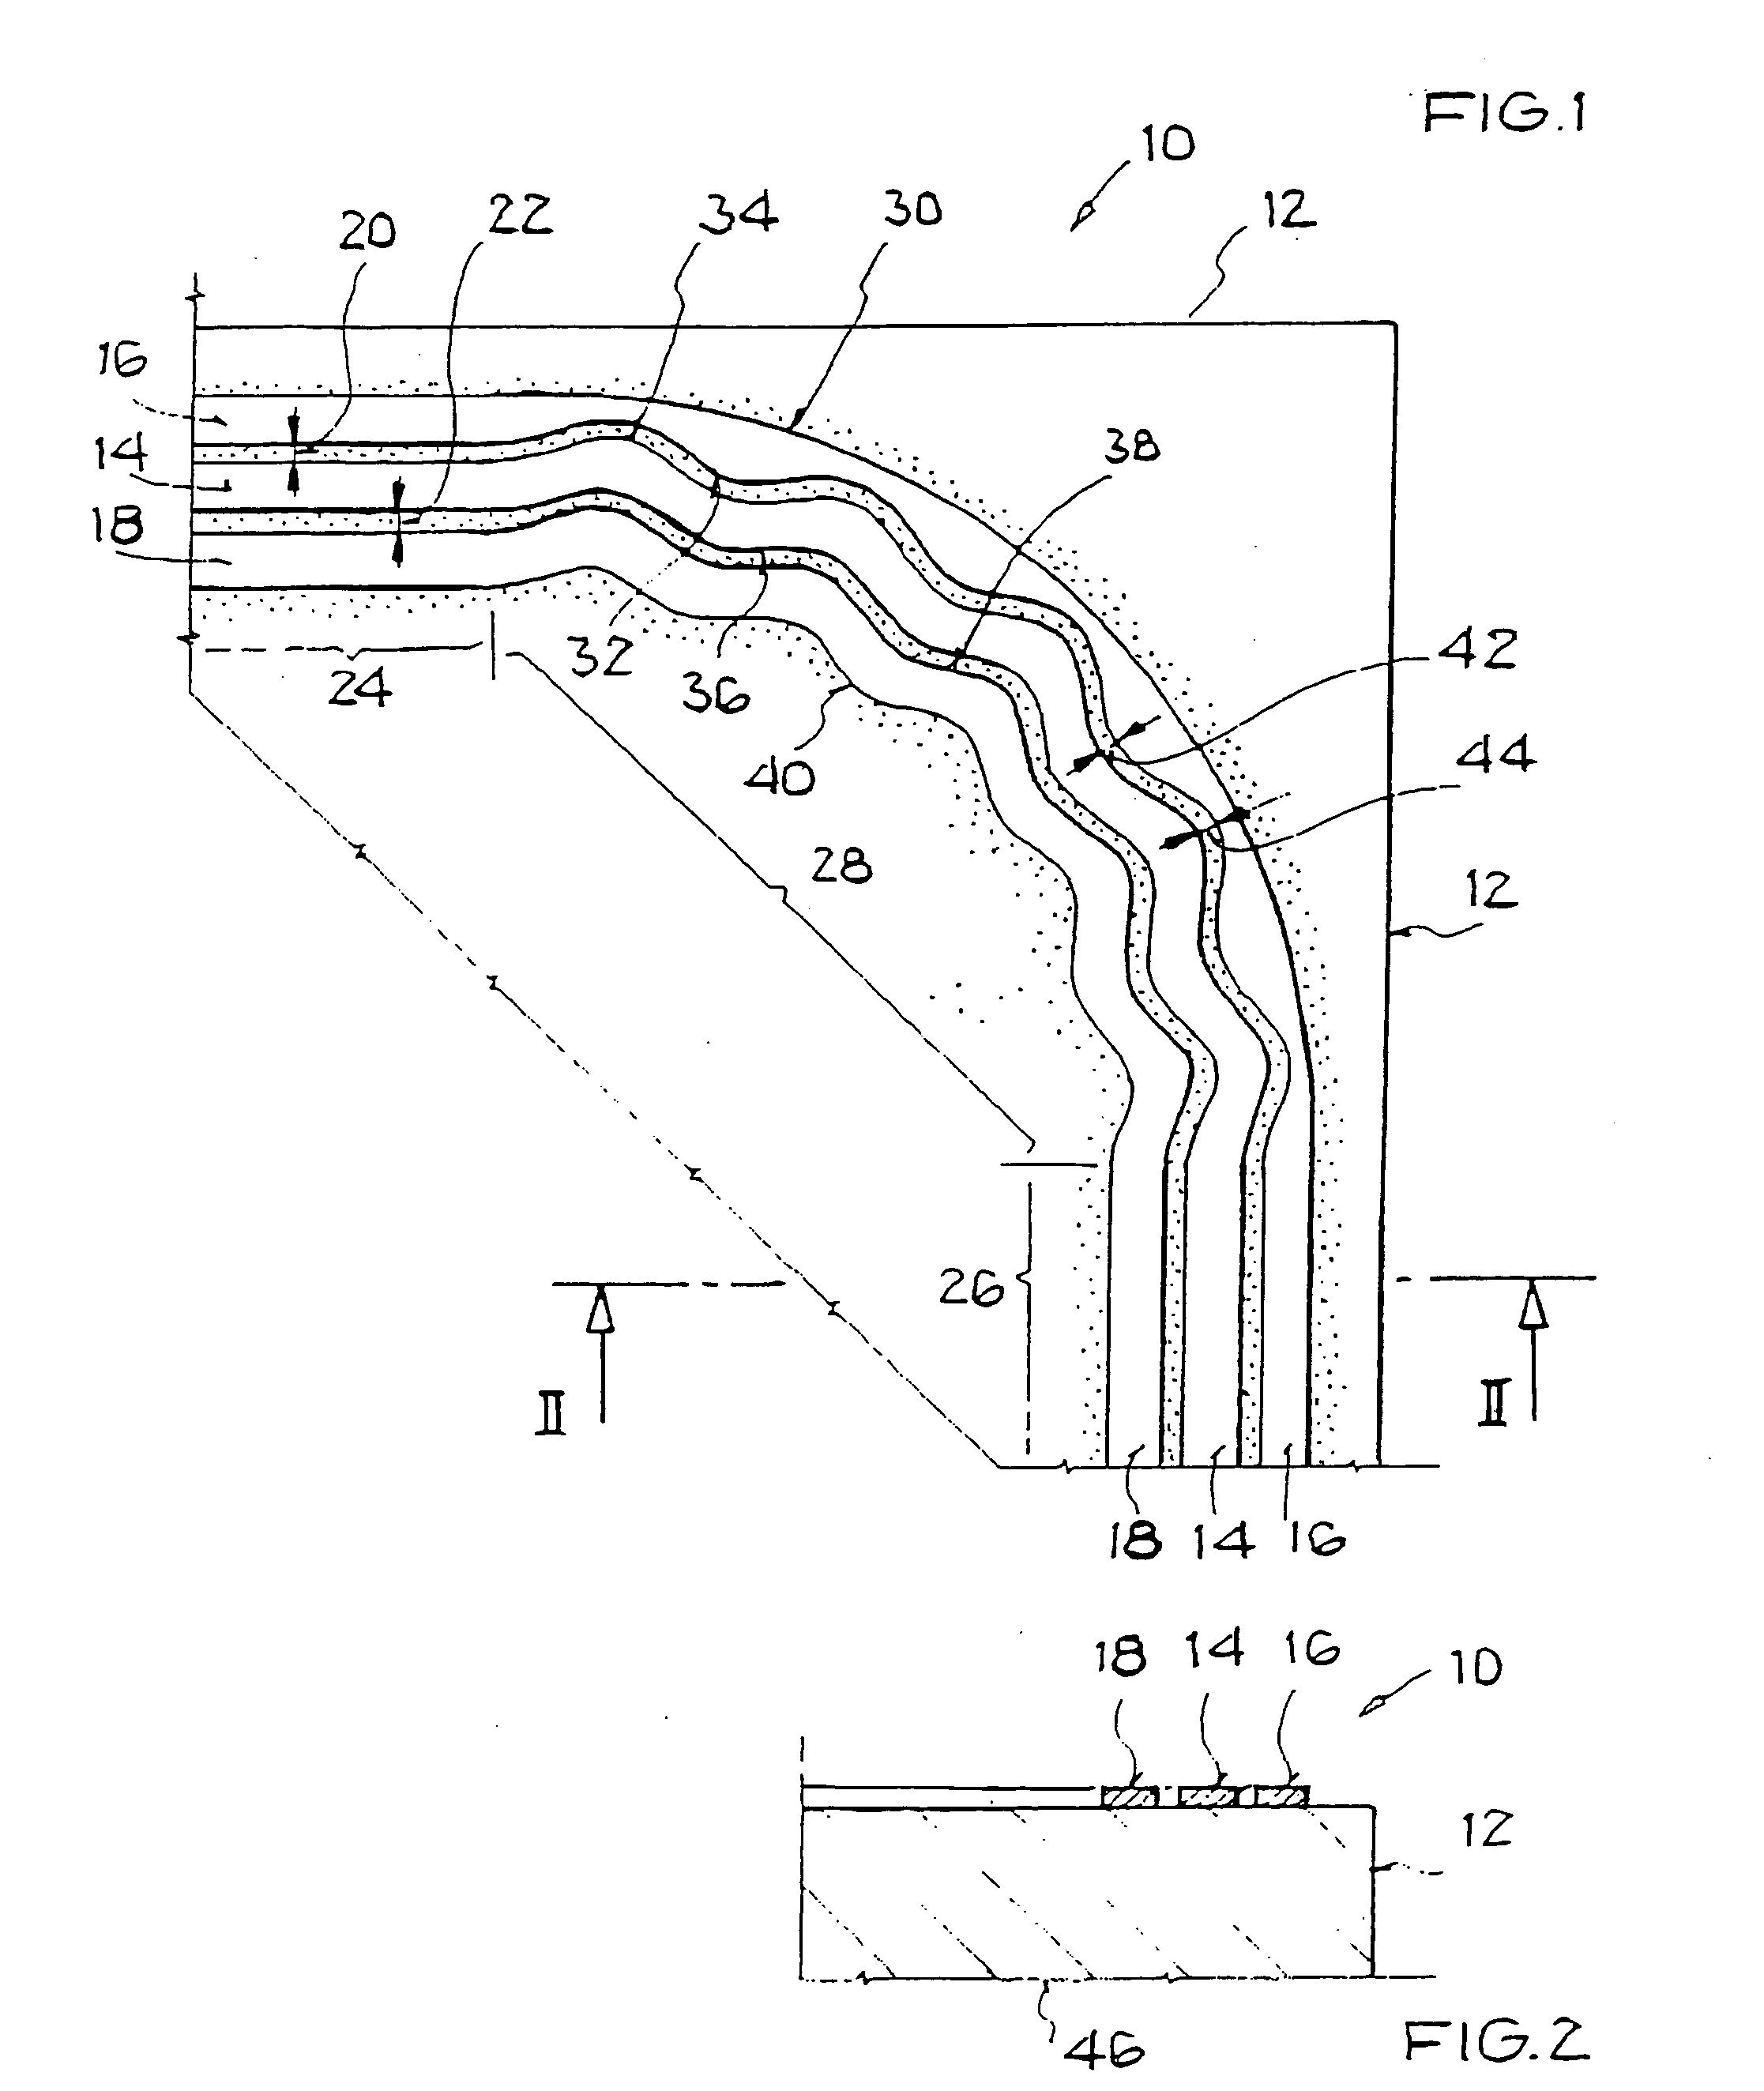 Planar microwave line with a directional change